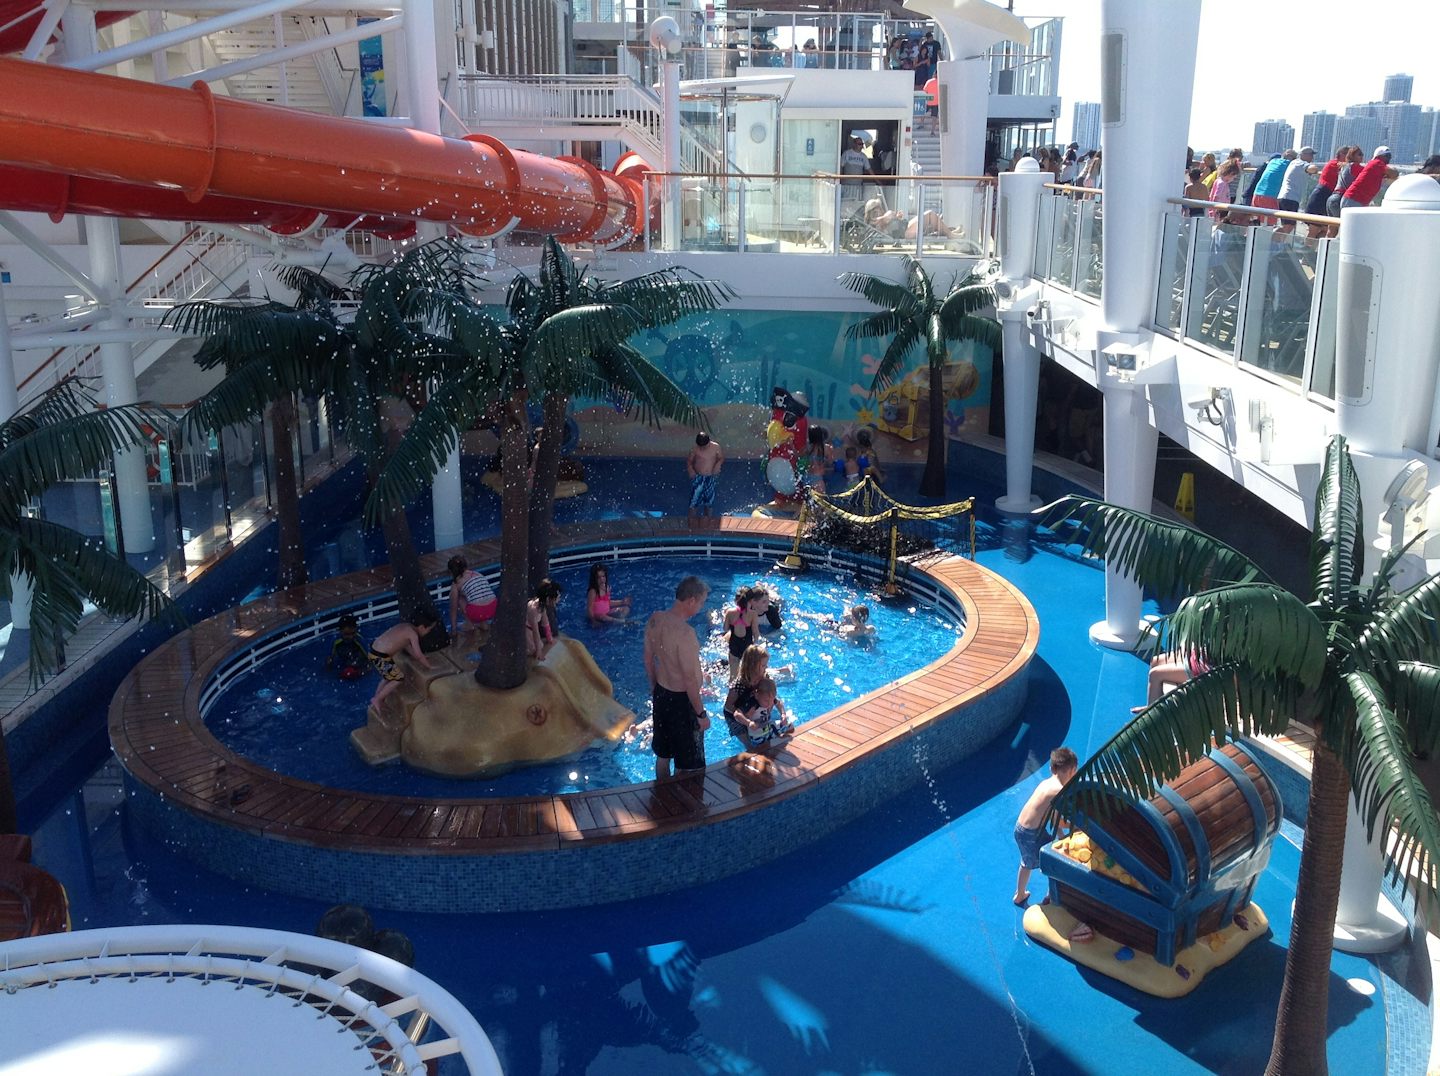 Main pool in the center of the ship